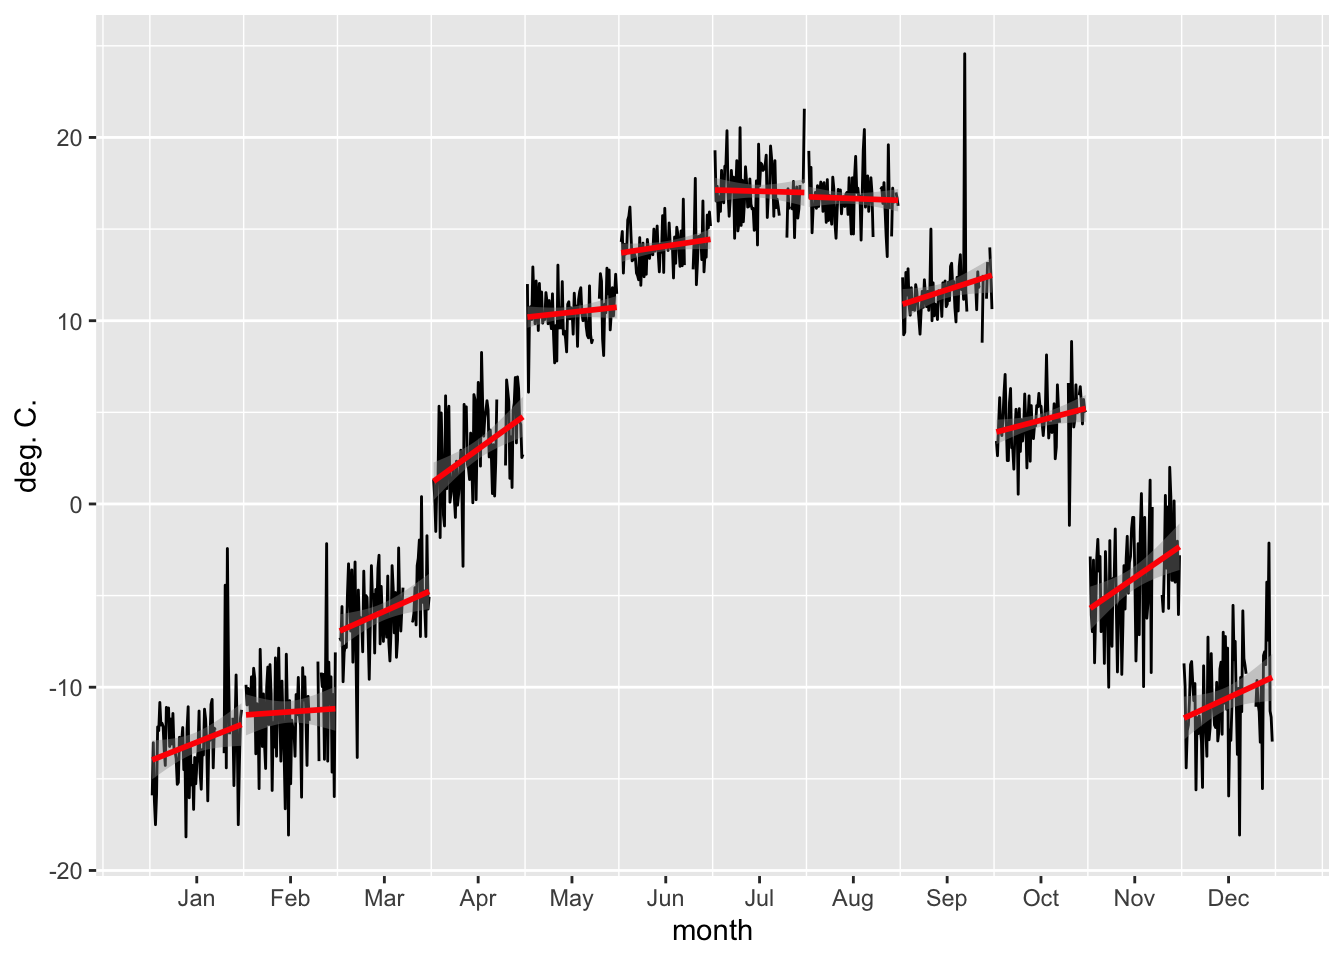 Changes in mean monthly temperatures are plotted with black lines over the entire observational record for Pskem meteorological station. The red lines are the per month best fit regression lines. The peak in the month of September is an outlier.